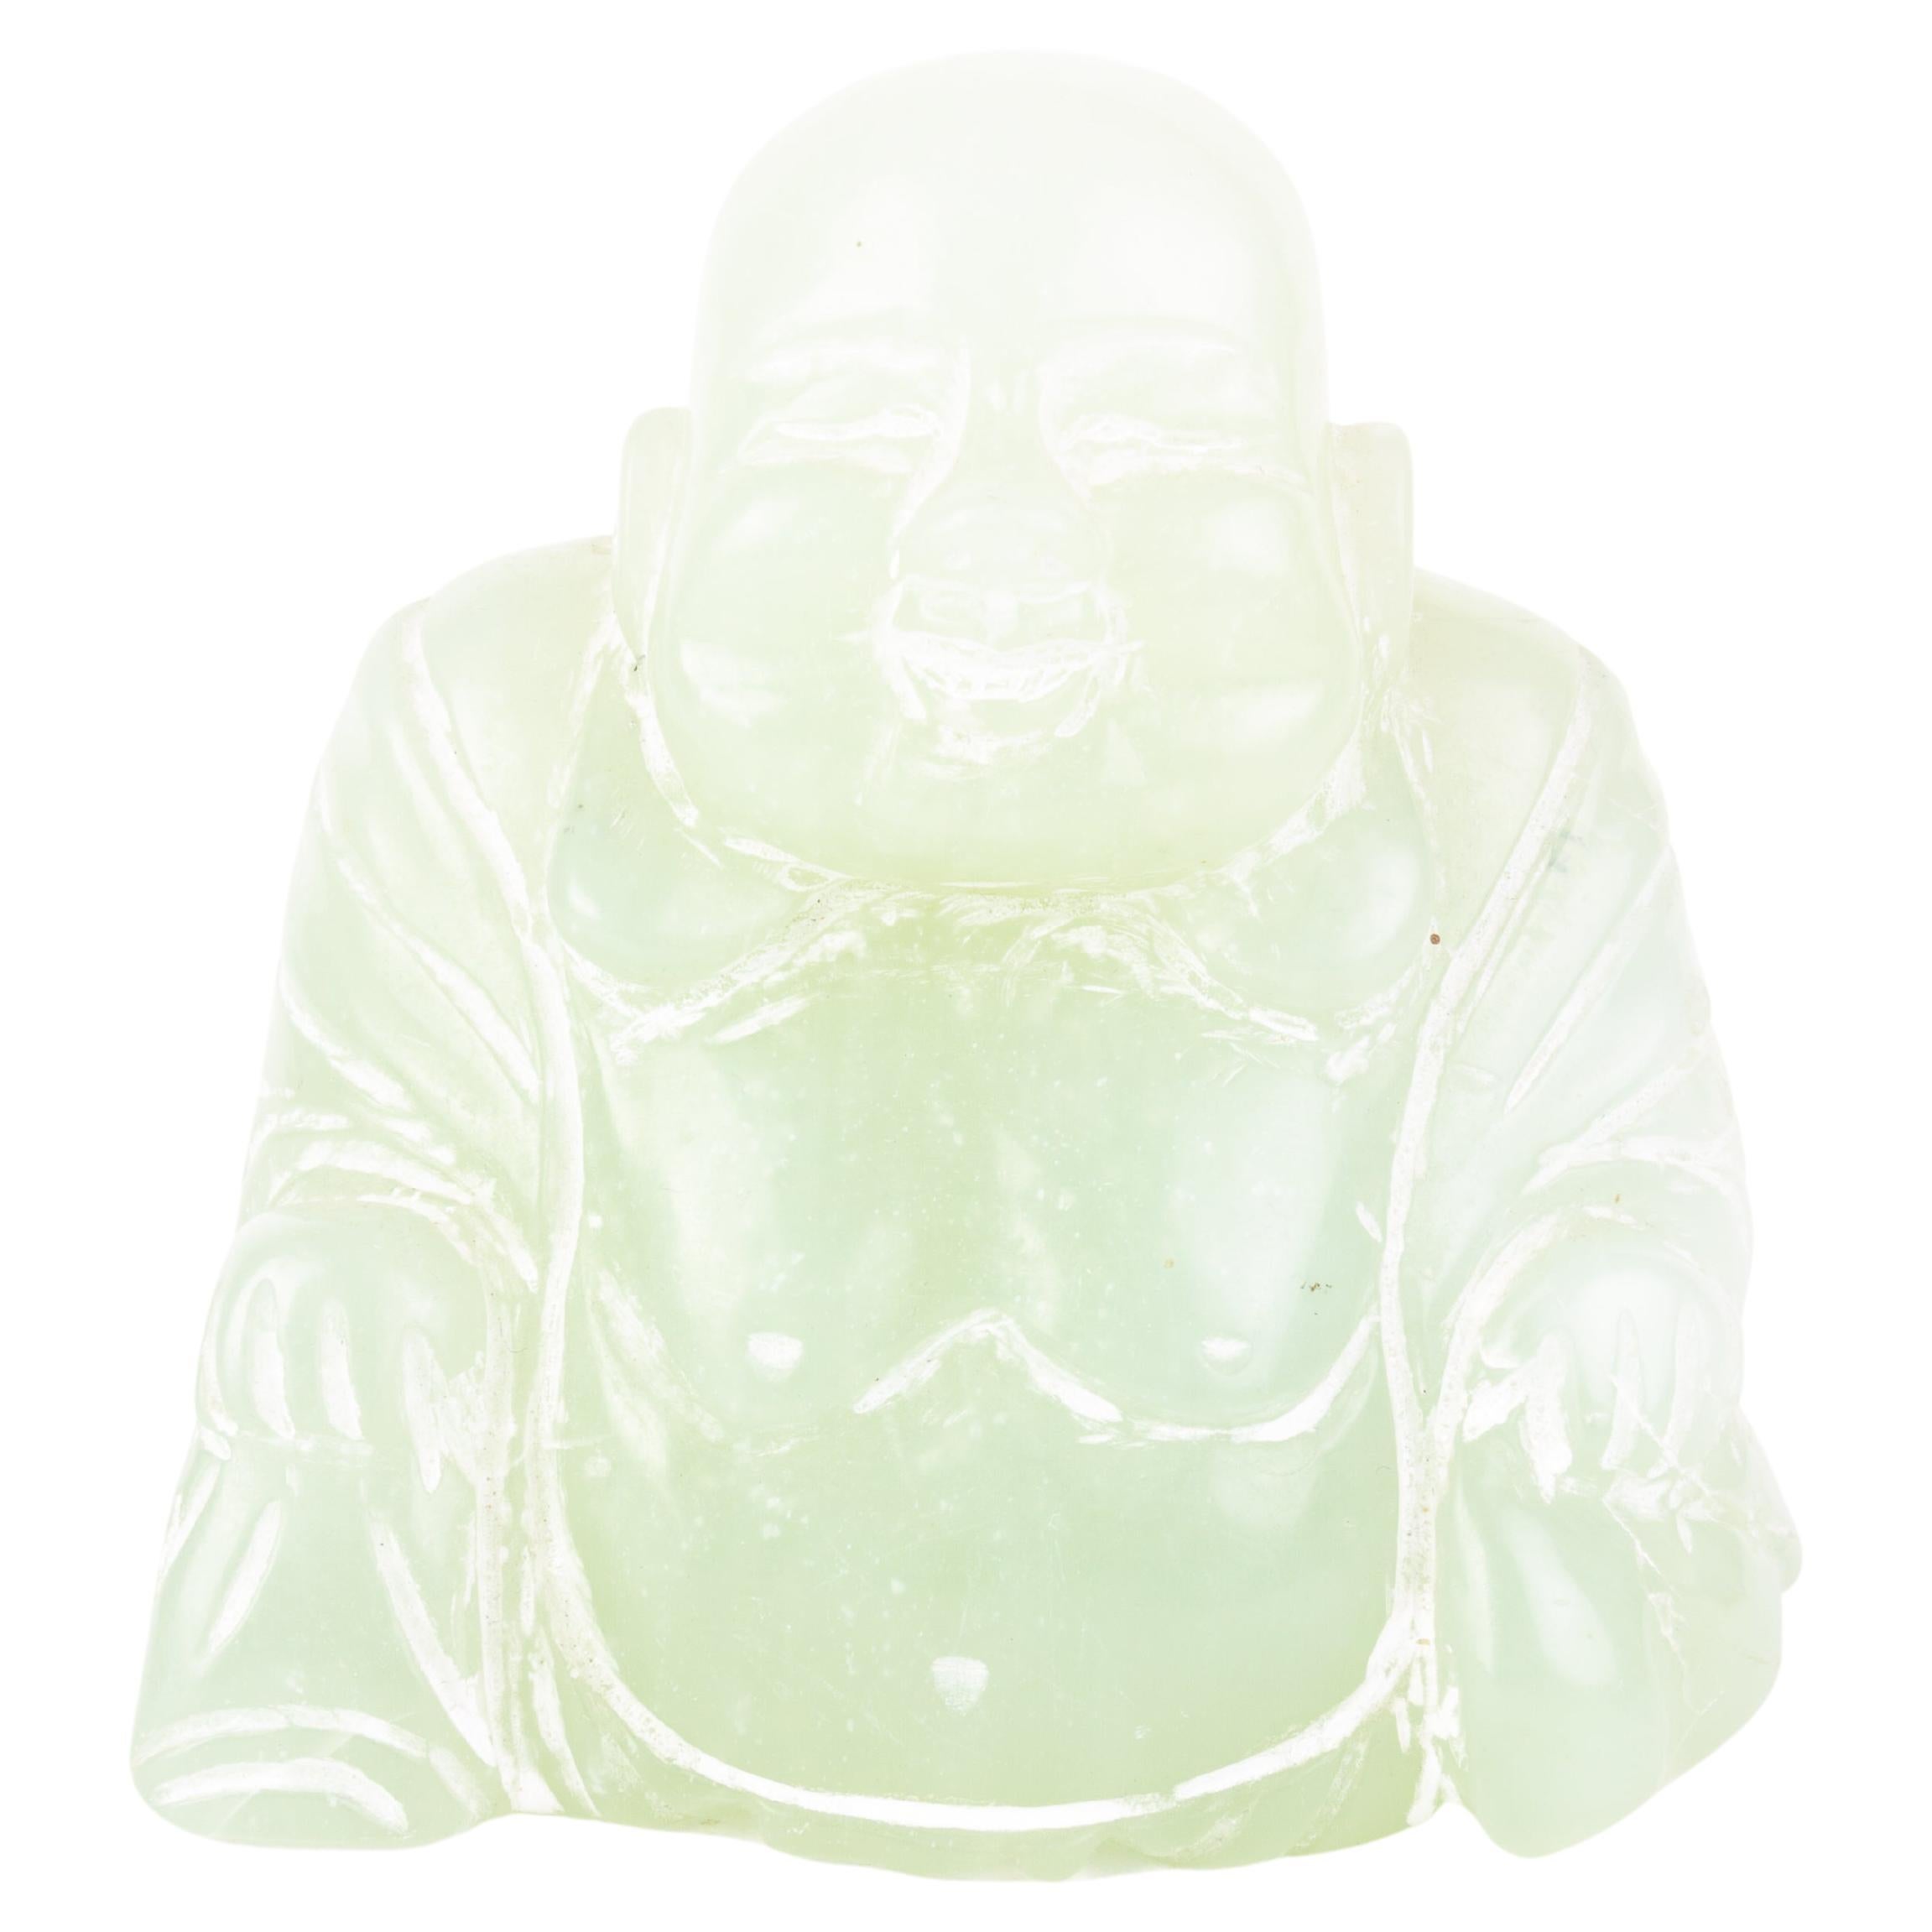 Chinese Carved Jade Buddha Sculpture 